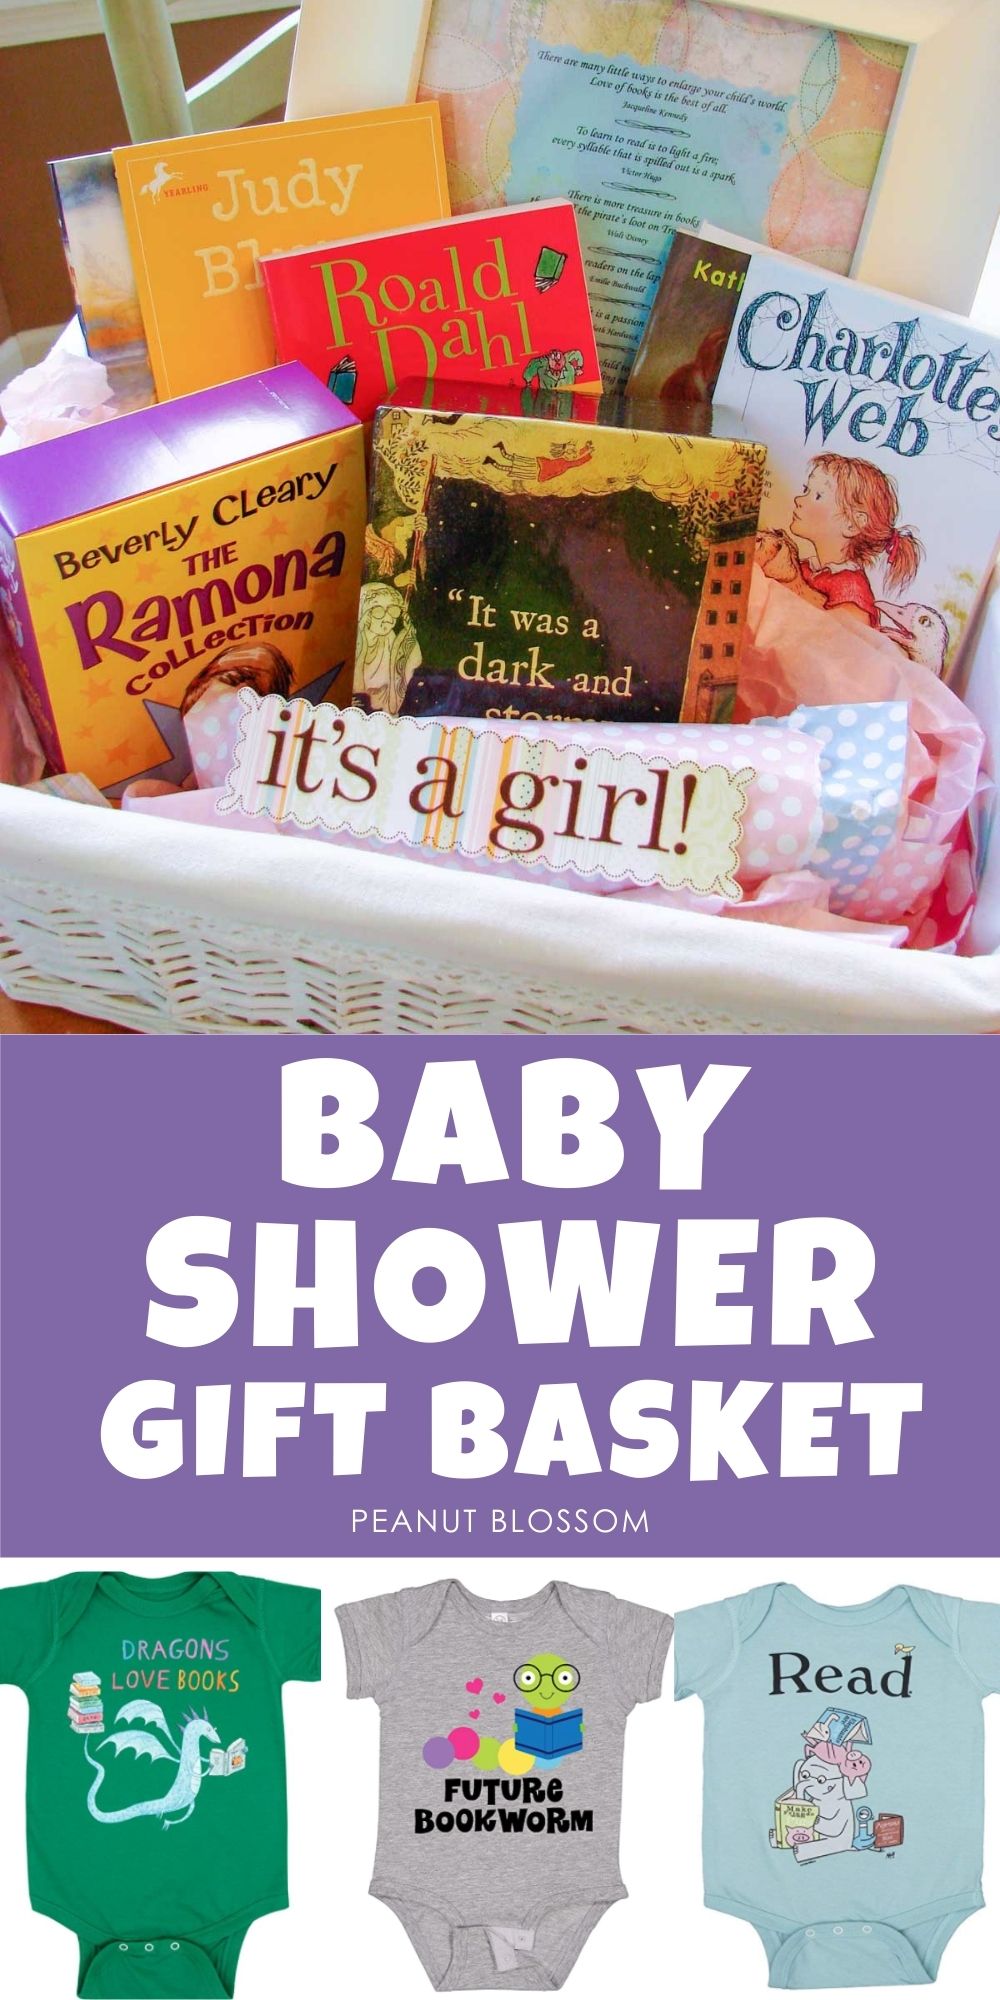 A photo collage shows a baby shower gift basket filled with books and three matching book themed baby onesies.